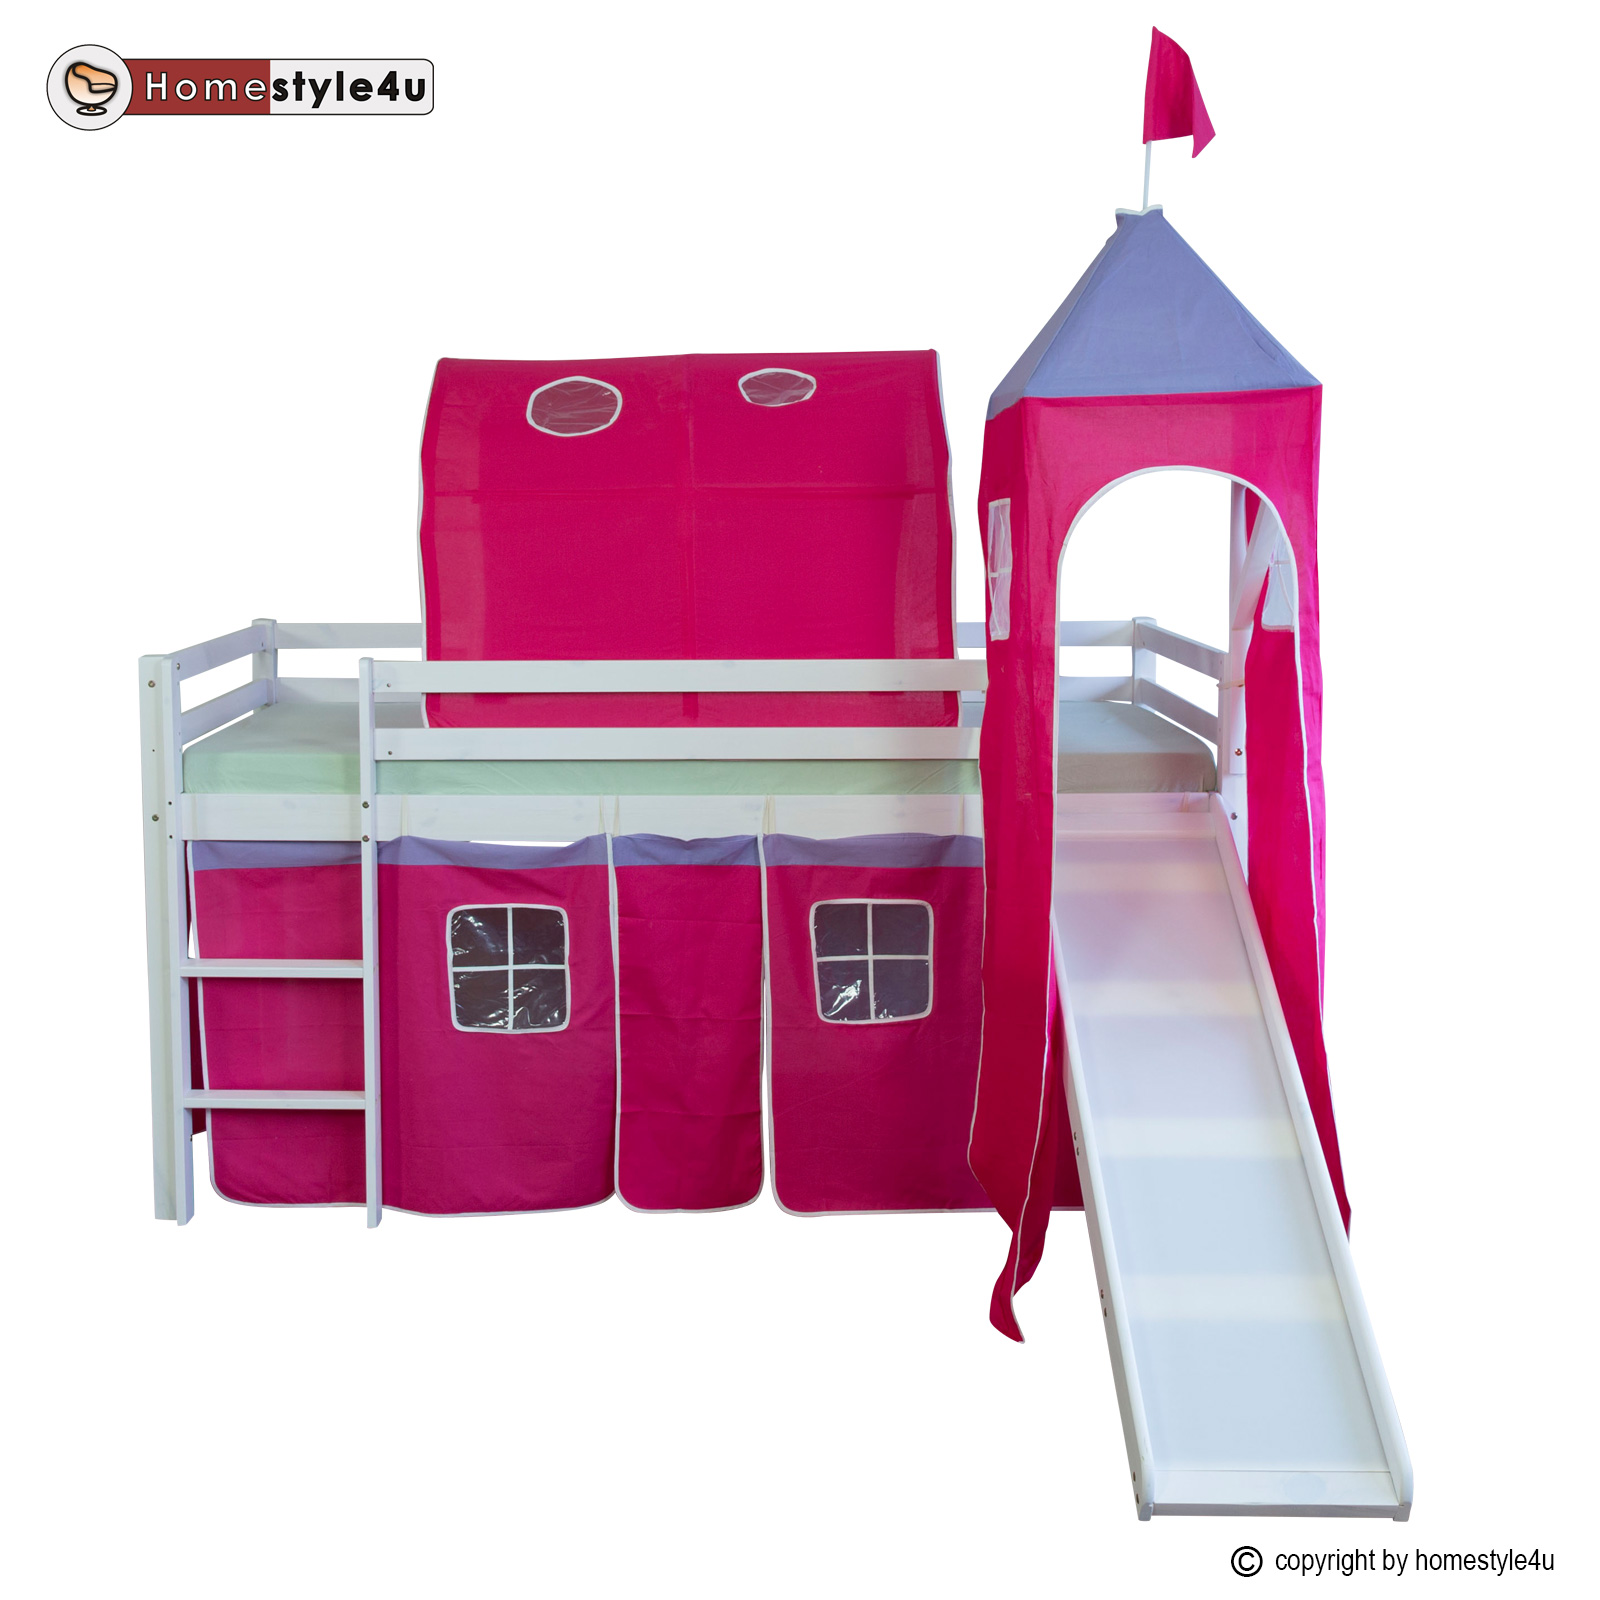 Loftbed Childrenbed Ladder Slide Tunnel Tower Solid Pine Curtain Red 90x200